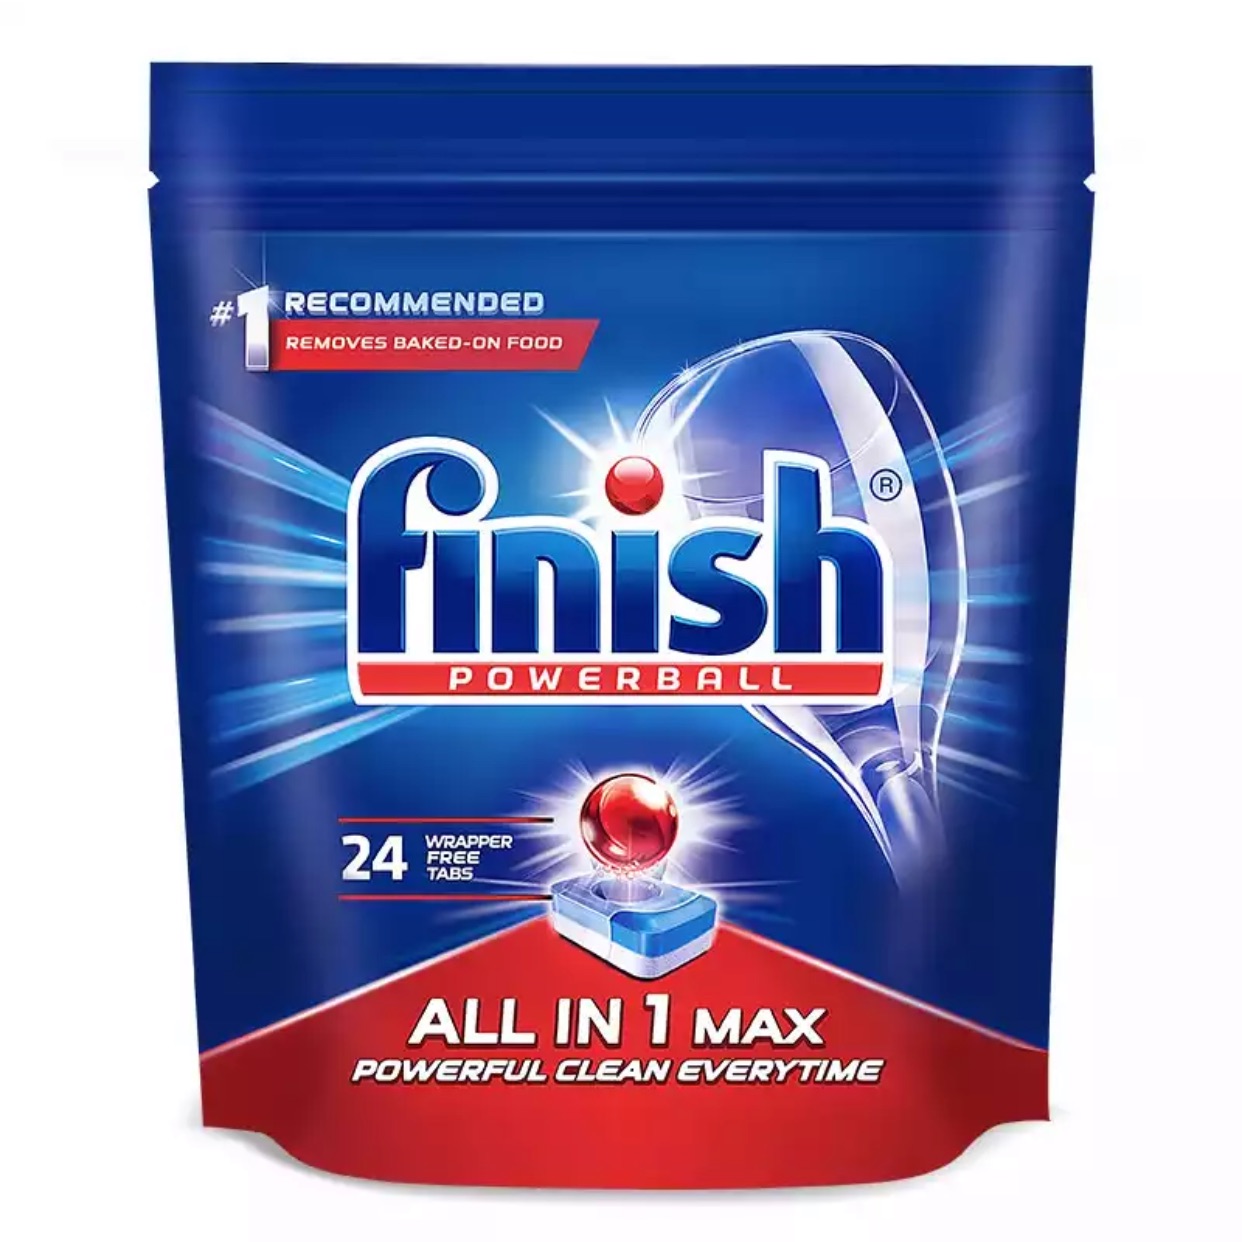 Finish powerball all in 1 max (16.5g x 24 tablets) the package is slightly crashed during the international shipment but it is still sealed.